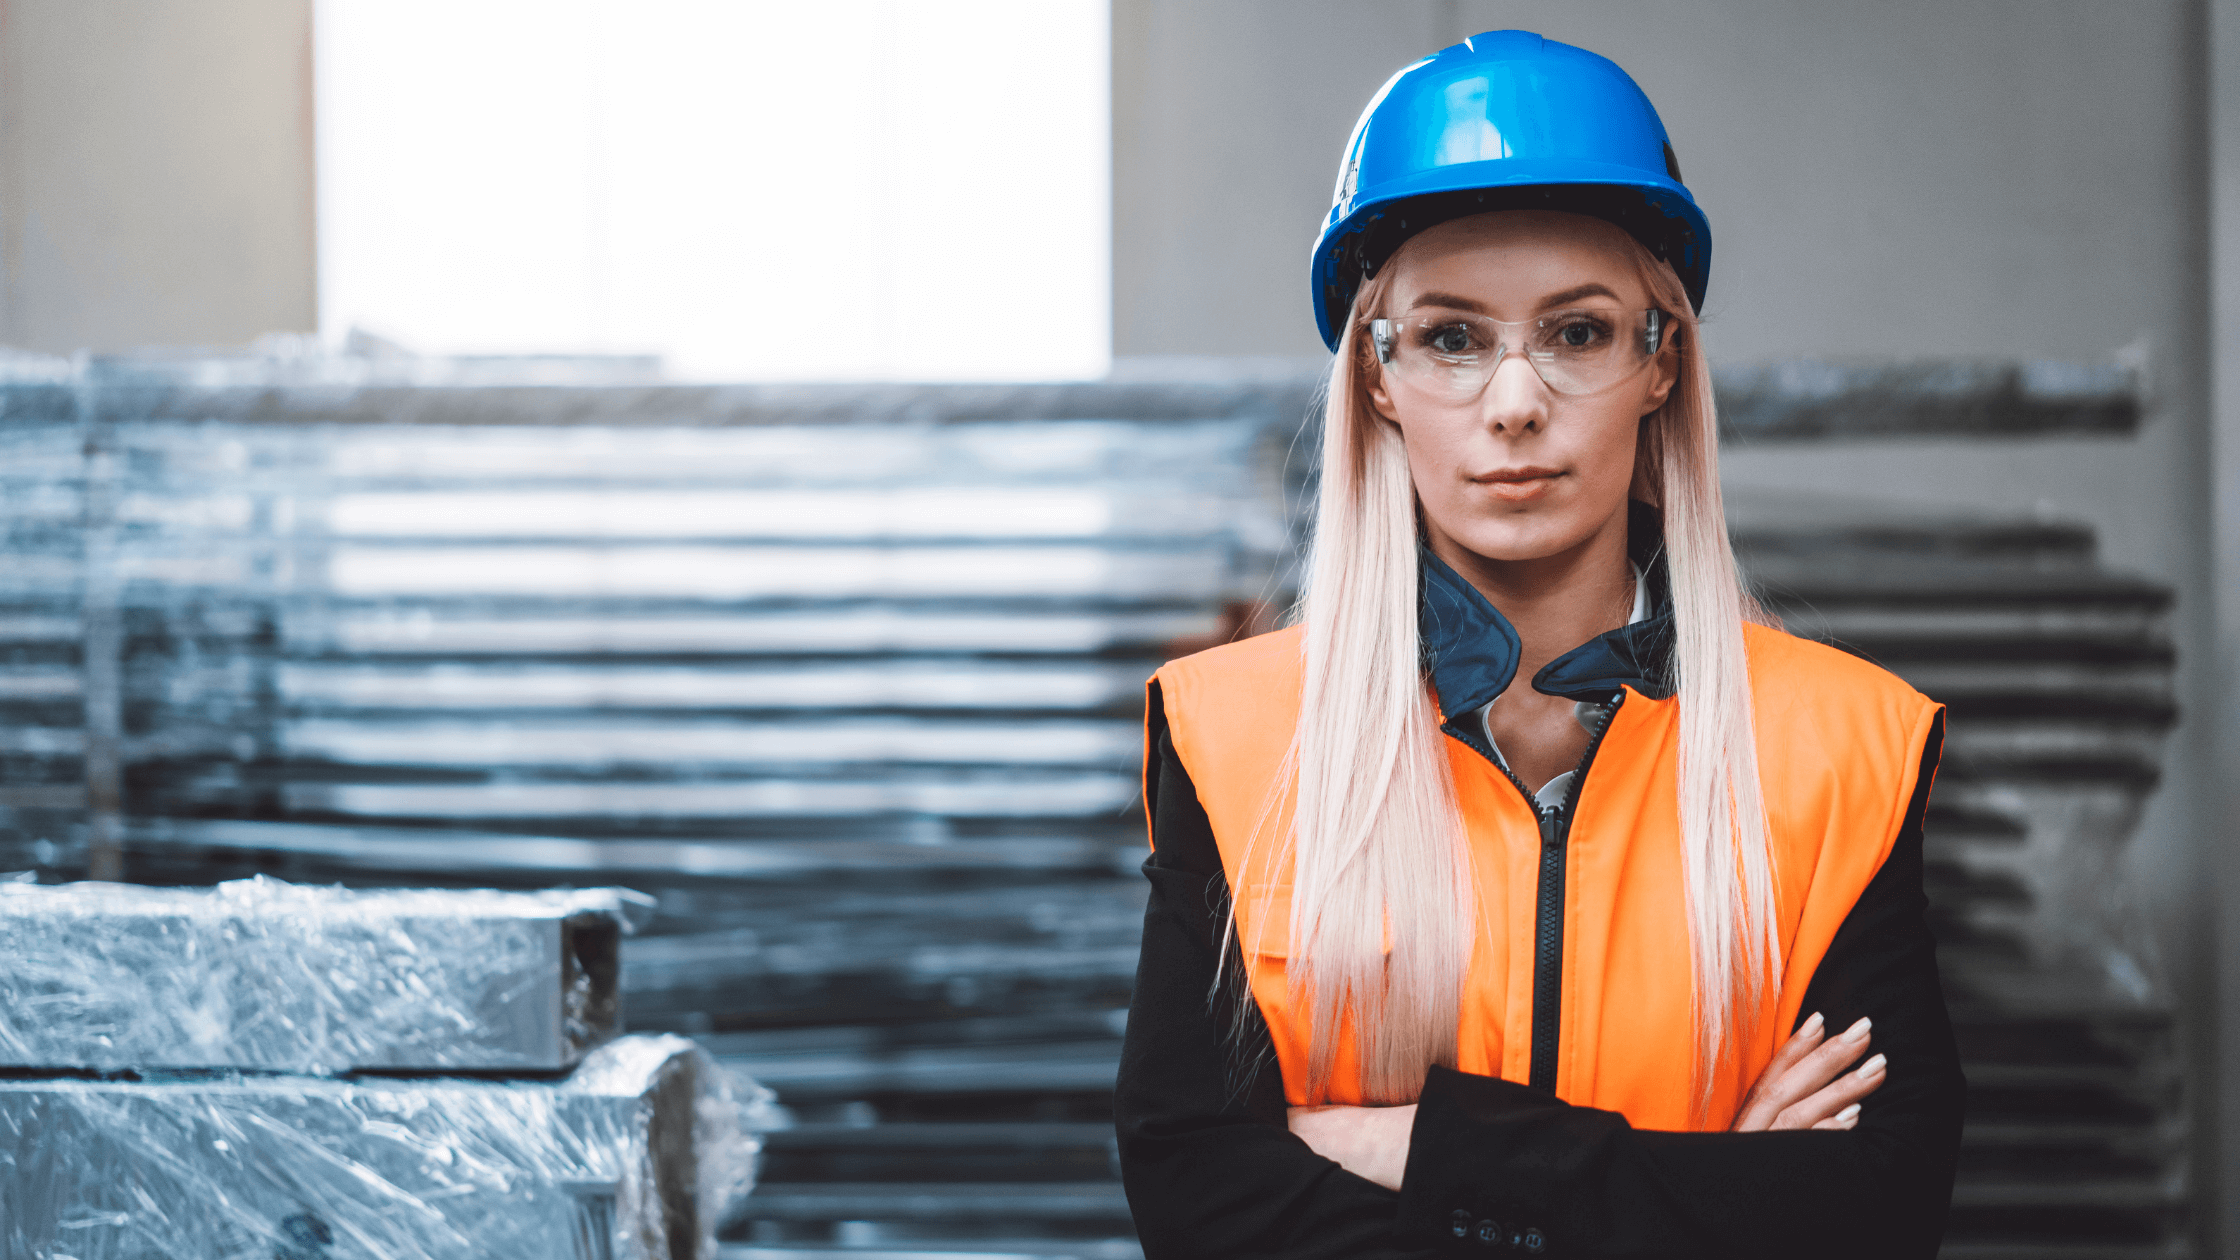 Women in Construction Image